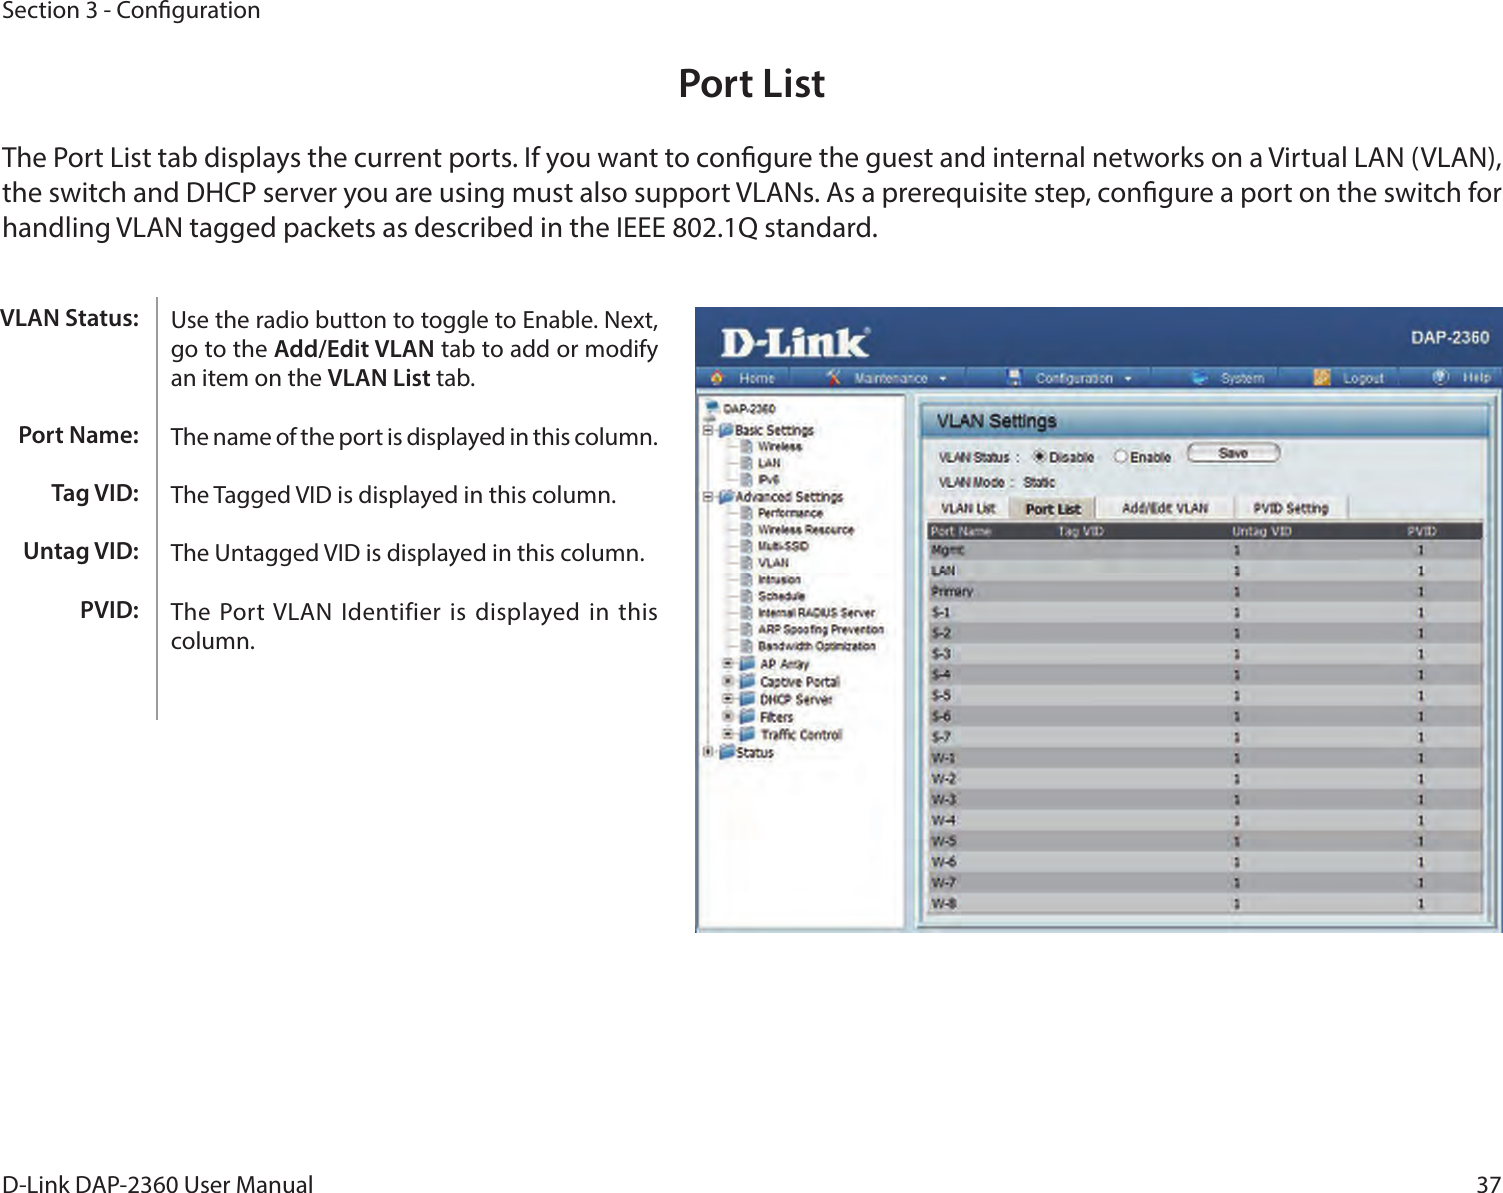 37D-Link DAP-2360 User ManualSection 3 - CongurationPort ListThe Port List tab displays the current ports. If you want to congure the guest and internal networks on a Virtual LAN (VLAN), the switch and DHCP server you are using must also support VLANs. As a prerequisite step, congure a port on the switch for handling VLAN tagged packets as described in the IEEE 802.1Q standard.Use the radio button to toggle to Enable. Next, go to the Add/Edit VLAN tab to add or modify an item on the VLAN List tab. The name of the port is displayed in this column.The Tagged VID is displayed in this column.The Untagged VID is displayed in this column.The Port VLAN Identifier is displayed in  this column.VLAN Status:Port Name:Tag VID:Untag VID:PVID: